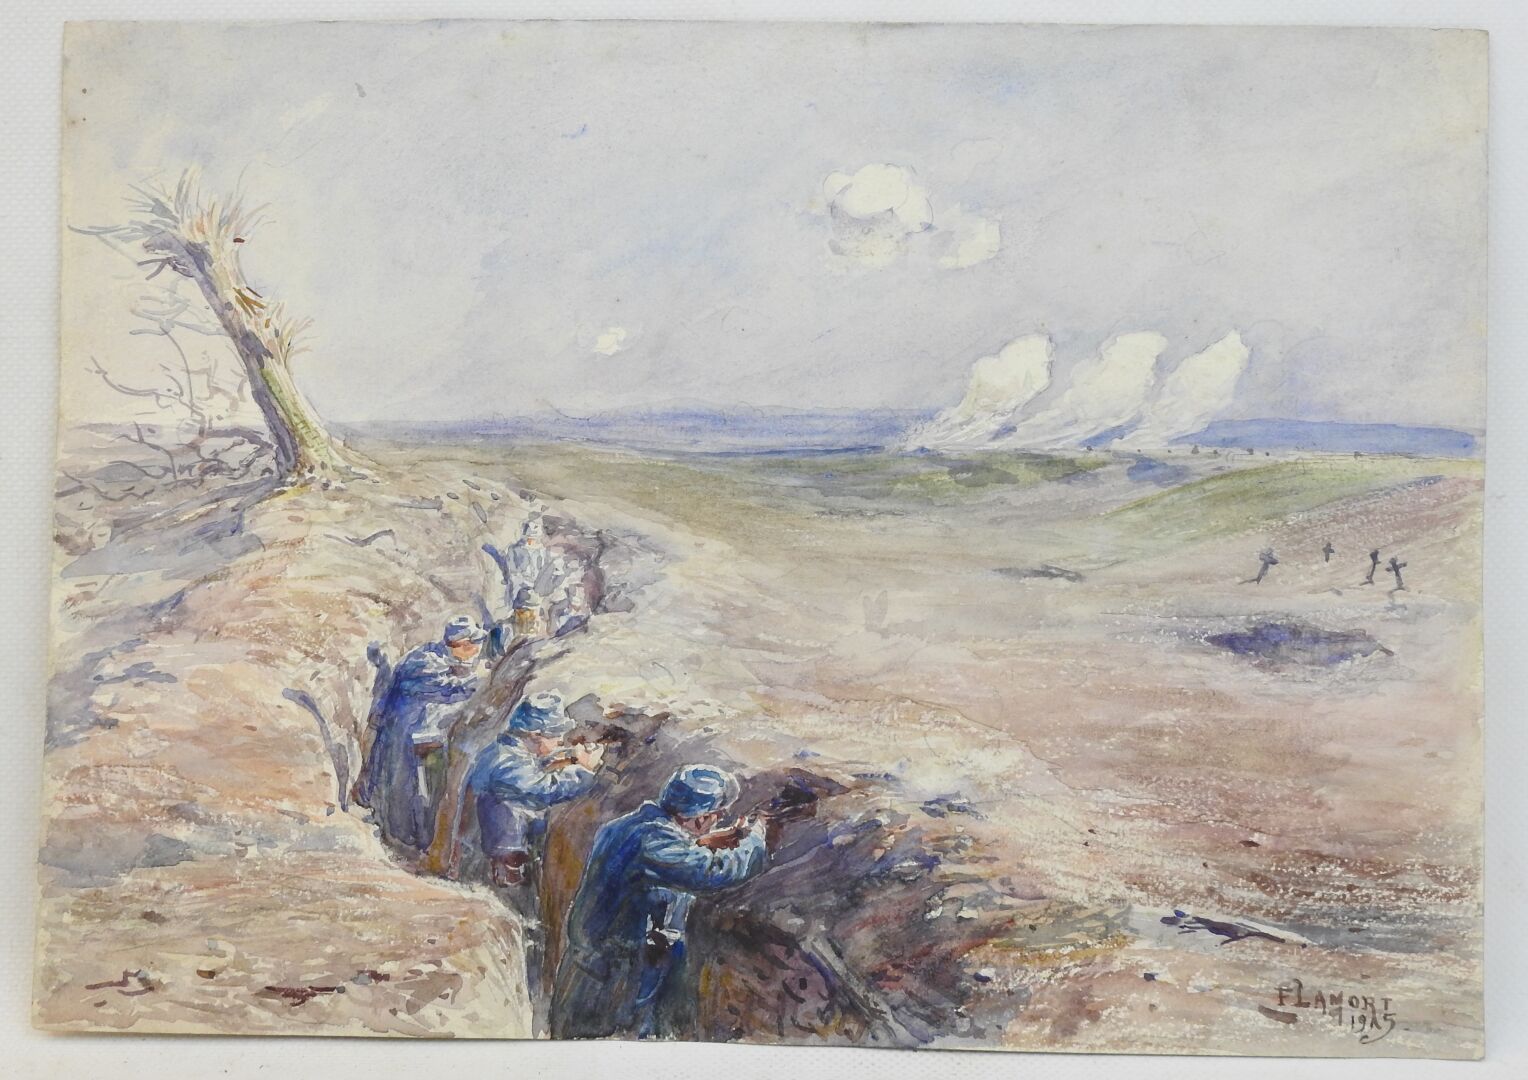 Null FLAMORT A. "Scene of trench, 1915" watercolor, SBD, dated 1915, 24 X 34 cm,&hellip;